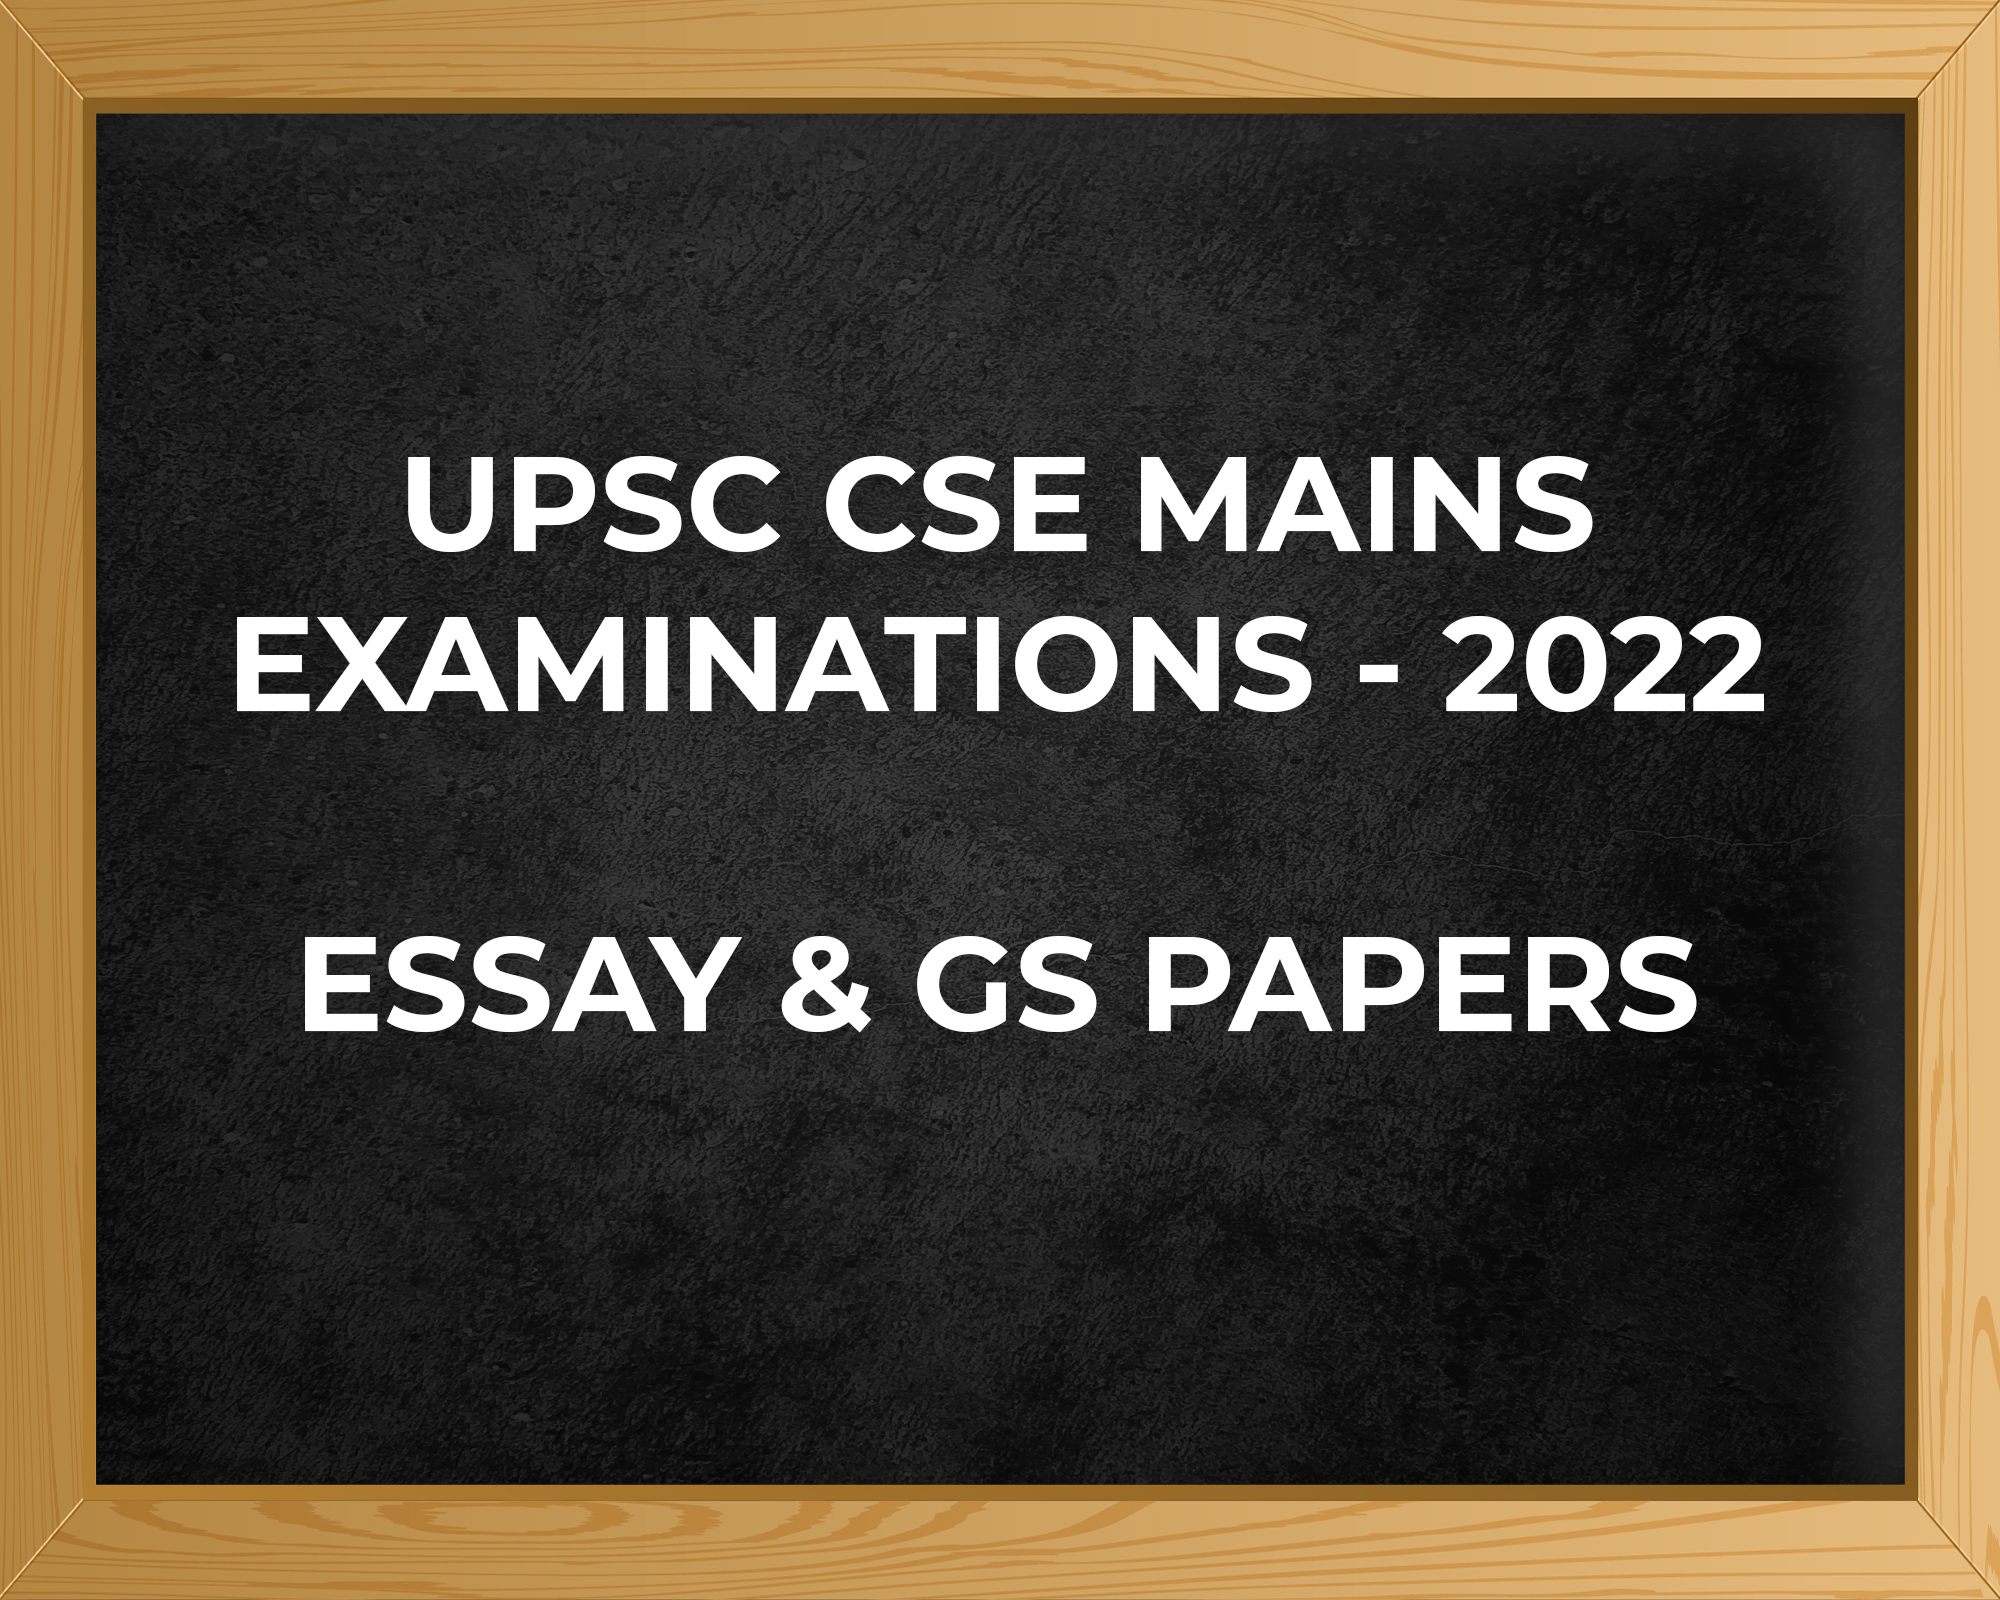 UPSC CSE Mains Examinations-2022 Question Papers